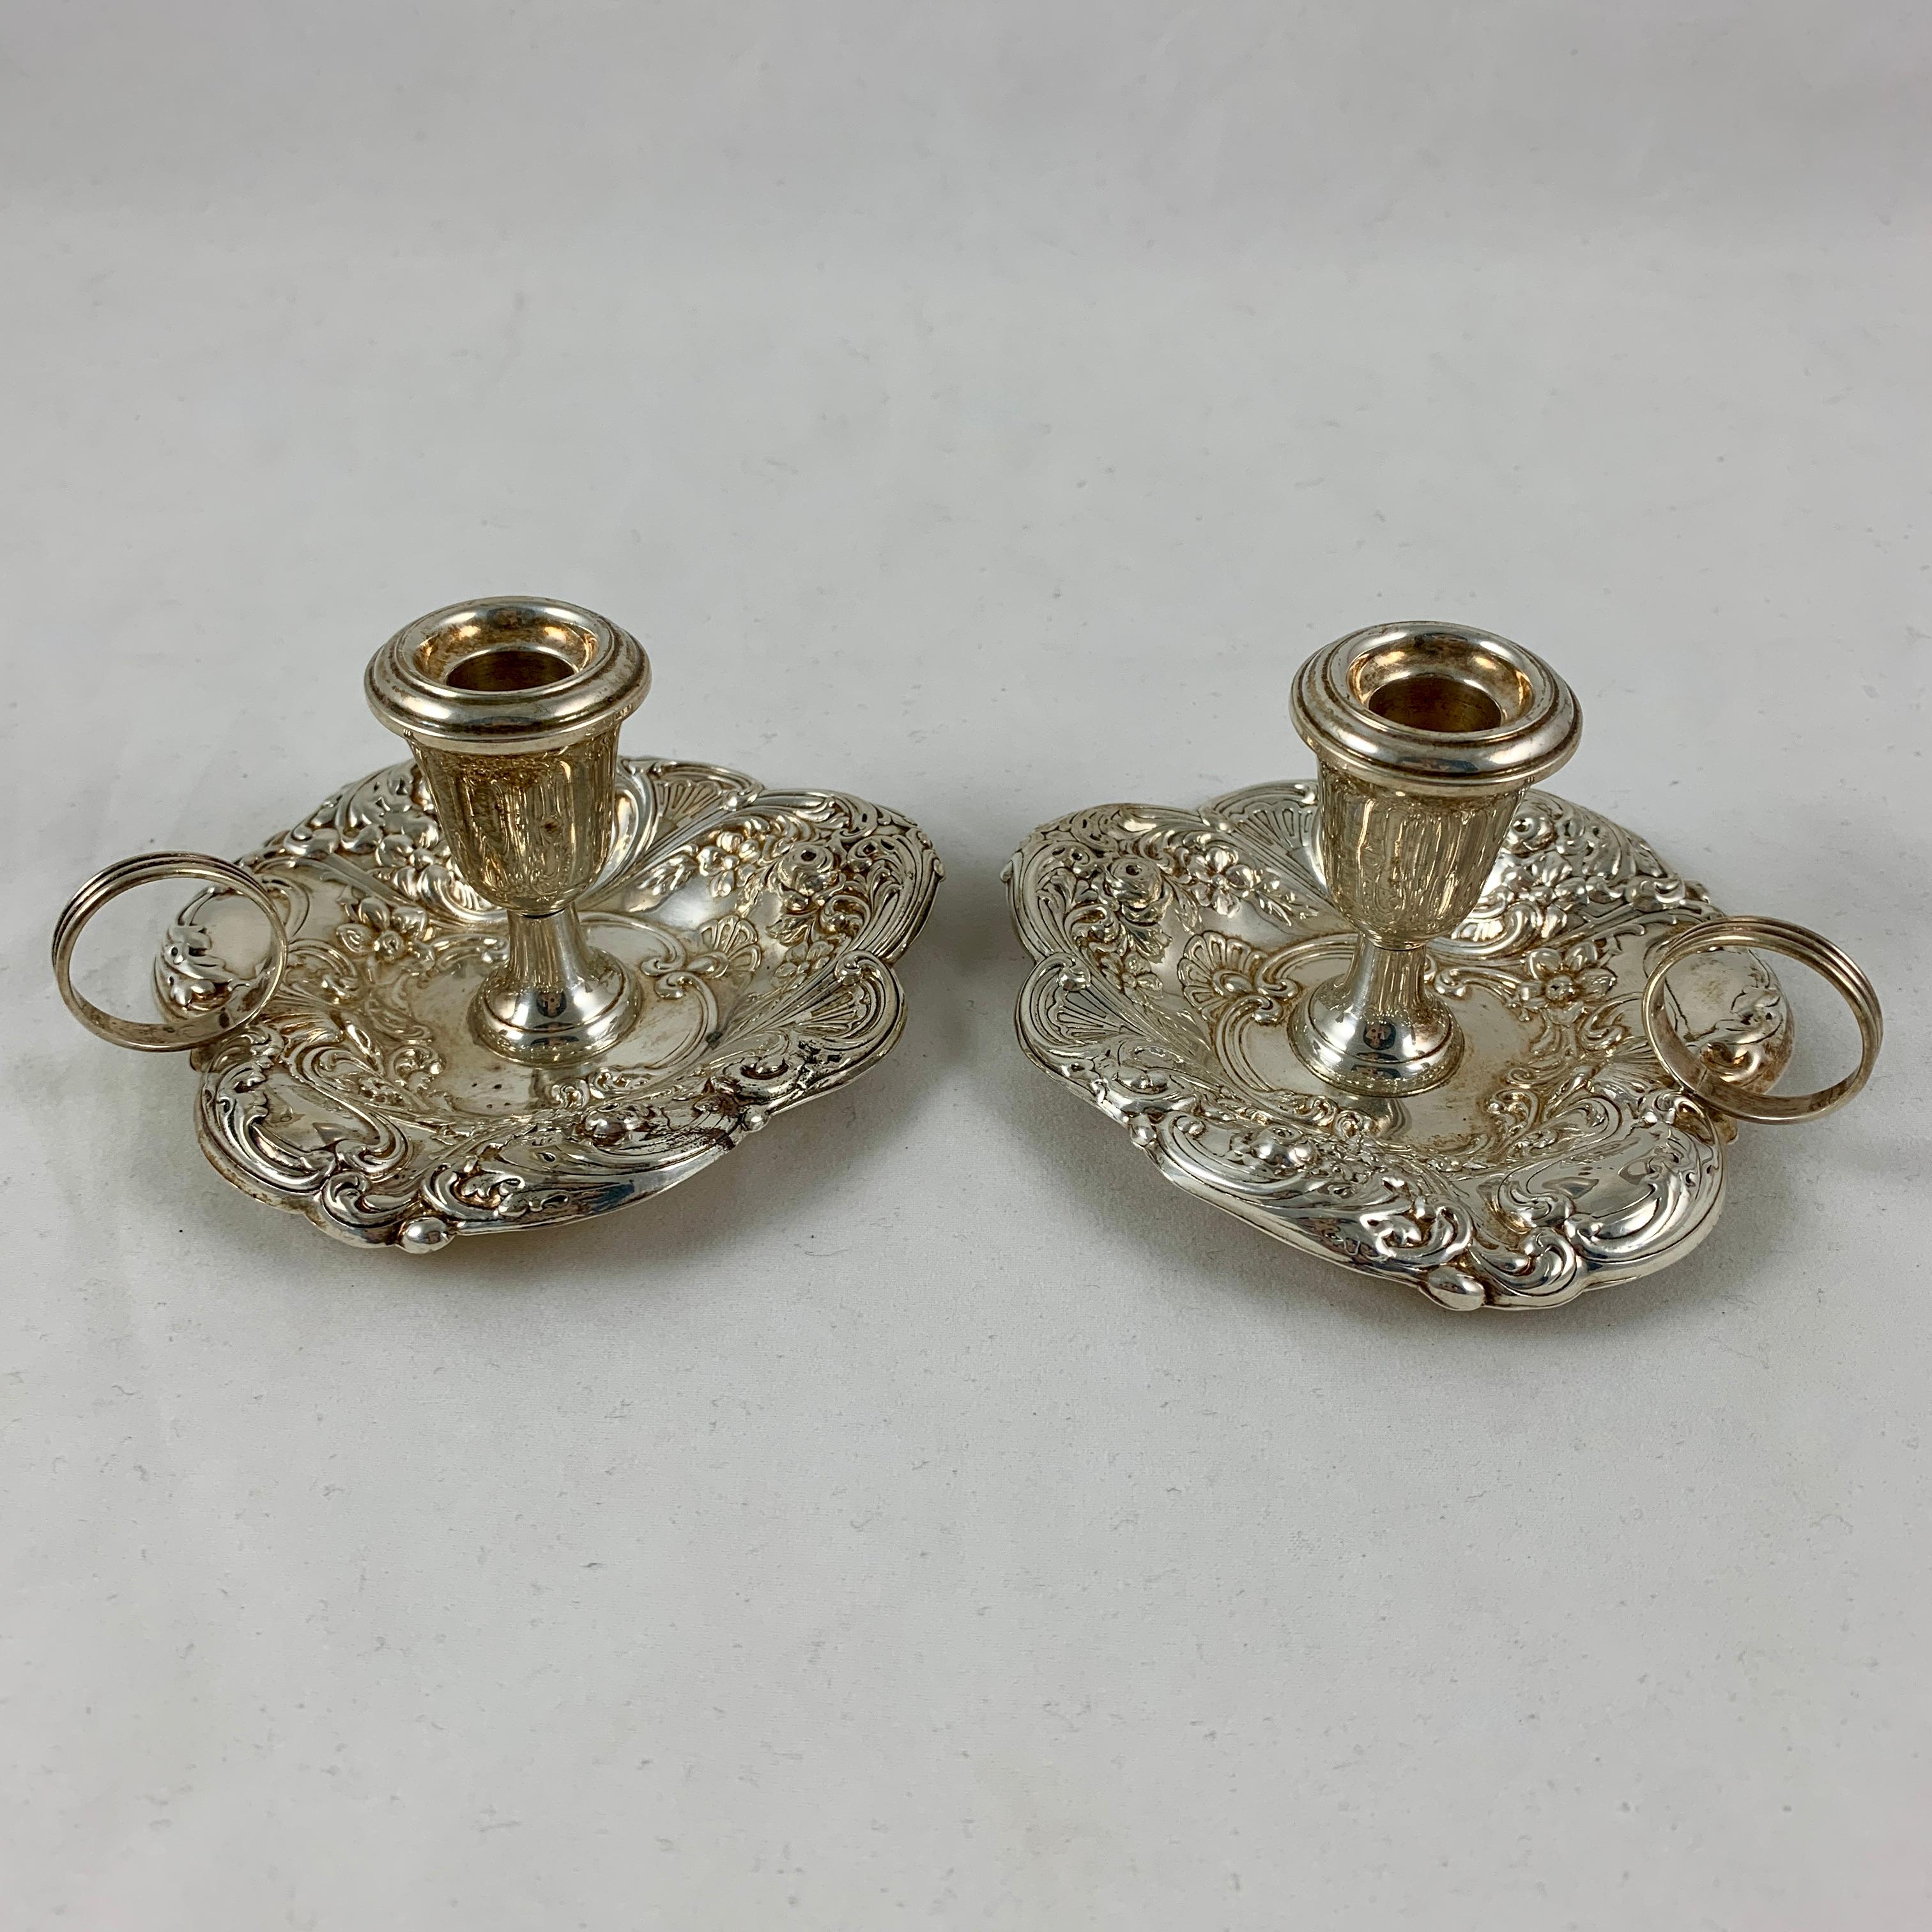 American Classical Gorham Sterling Silver Floral Repoussé Chambersticks, circa 1920-1930, a Pair For Sale